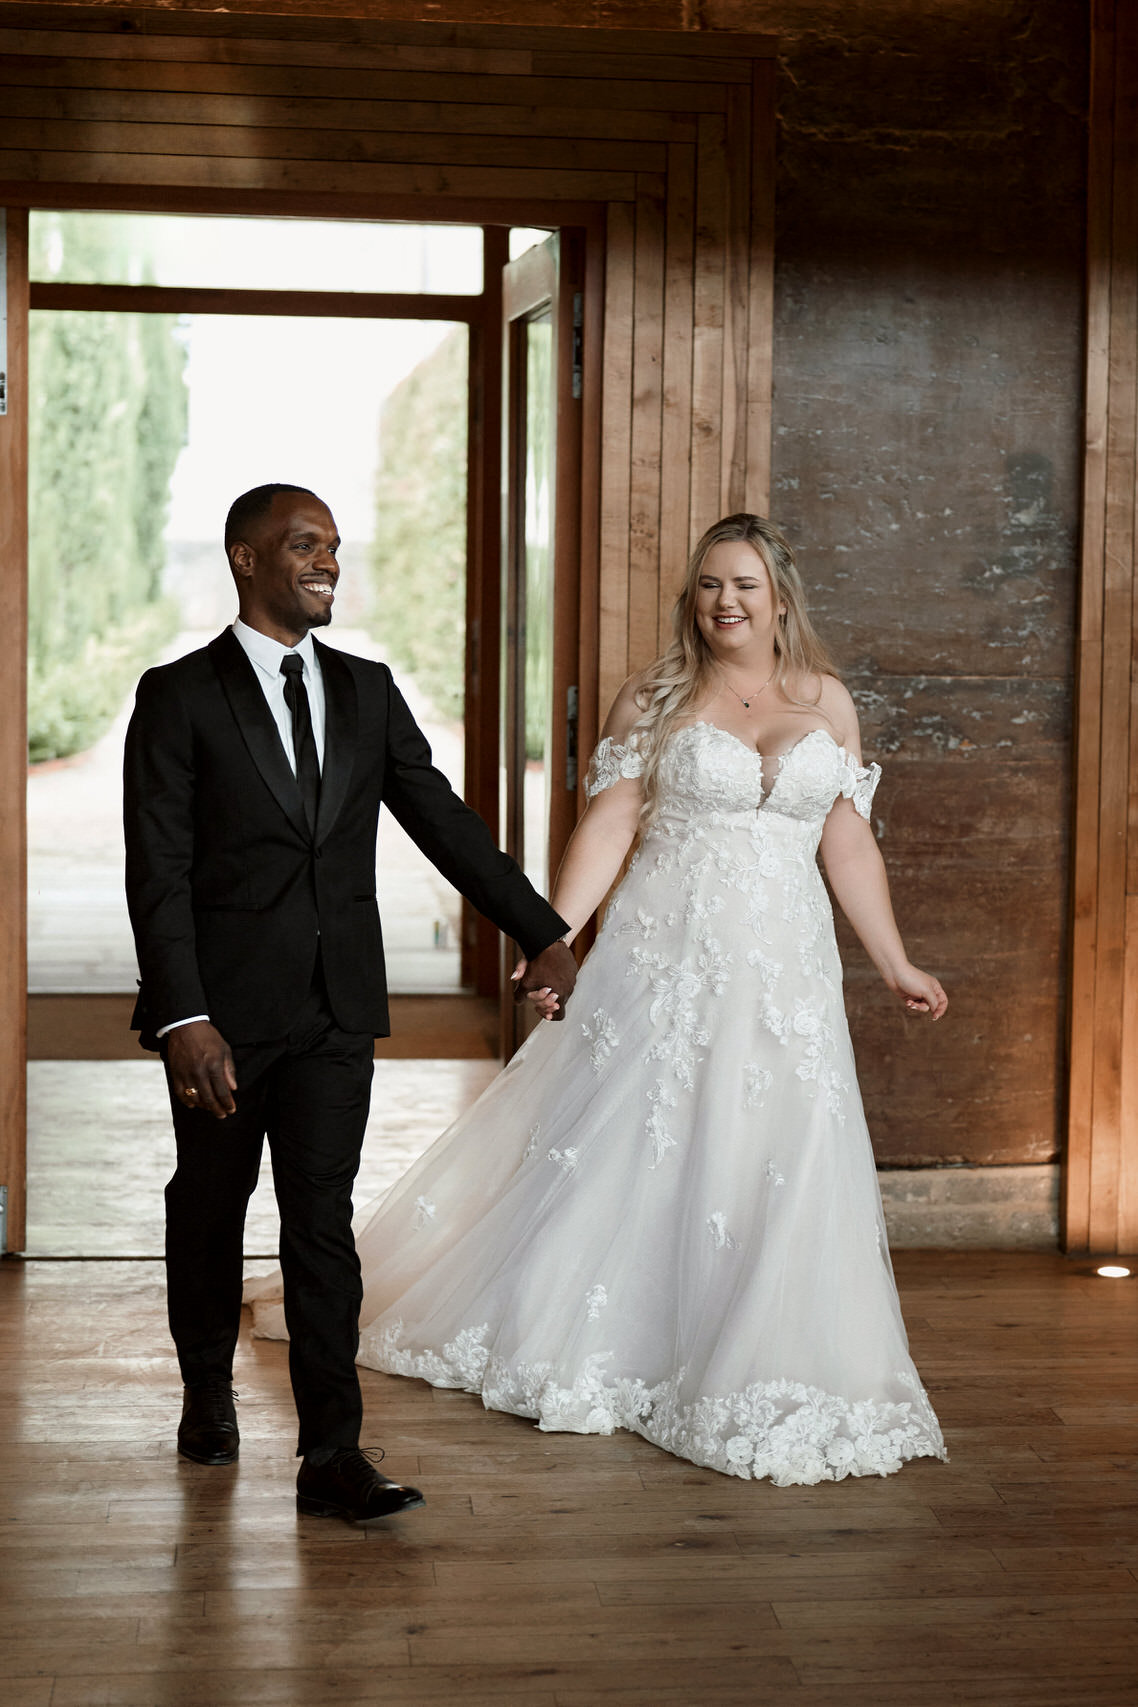 A couple getting married are holding hands in a room with wood walls.